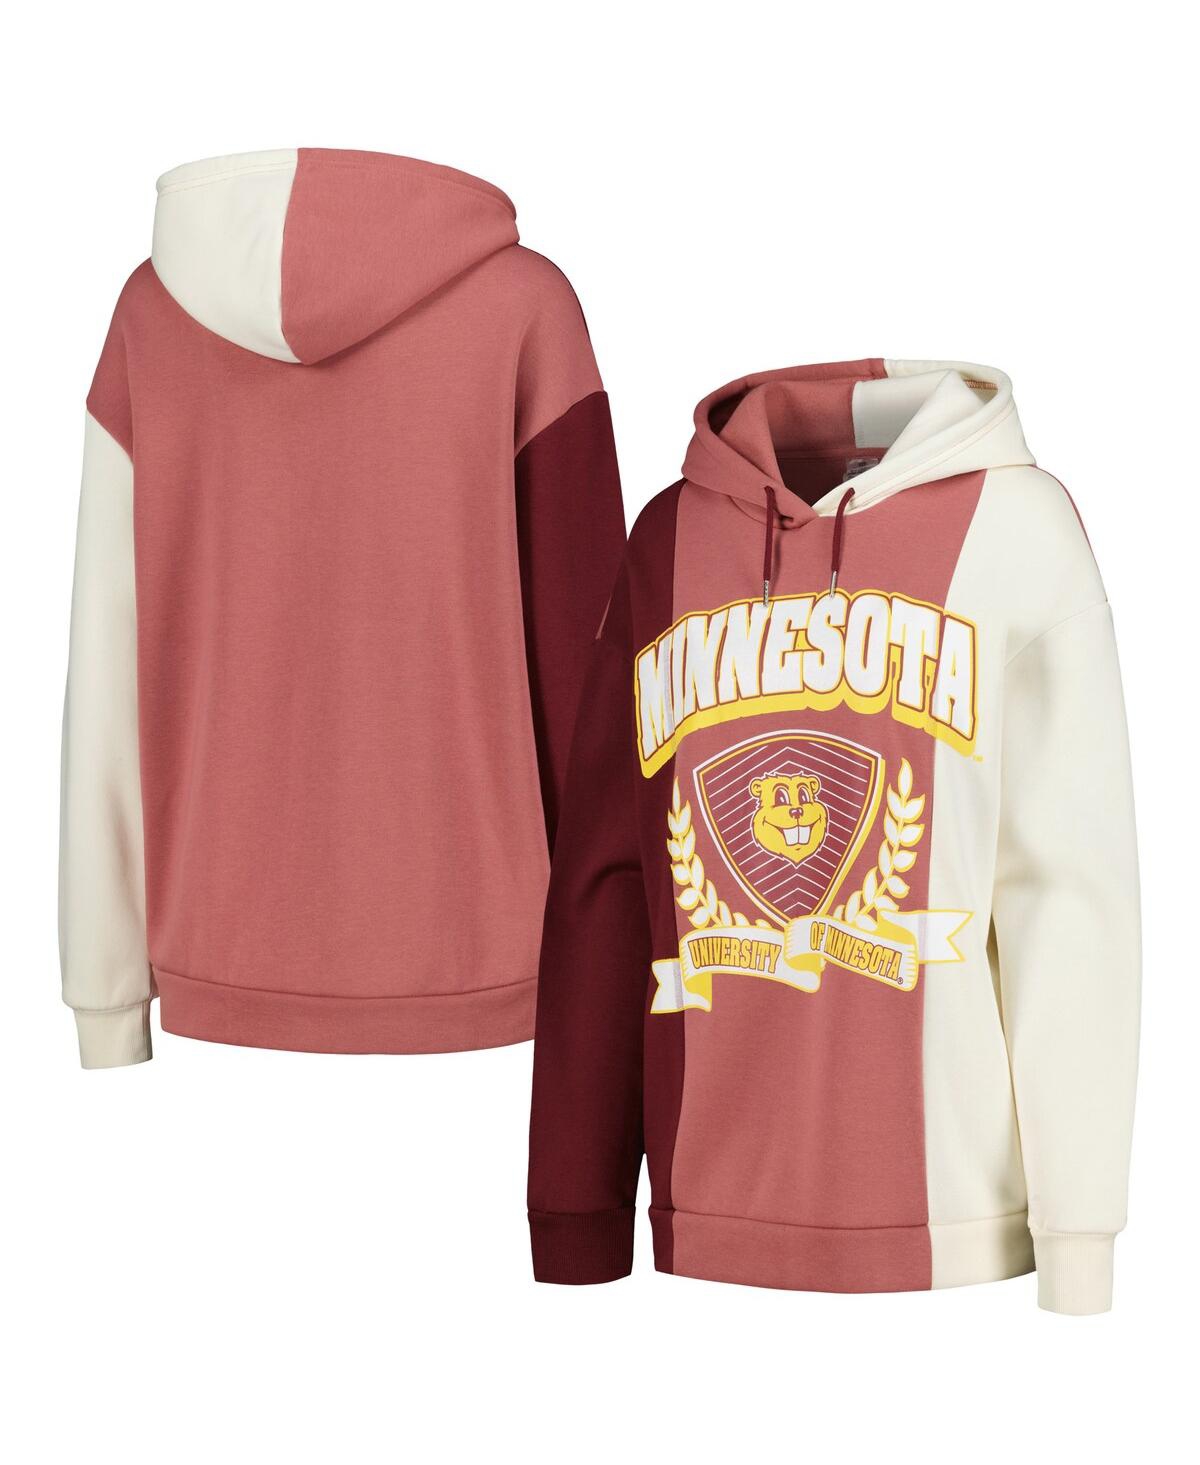 Women's Gameday Couture Maroon Minnesota Golden Gophers Hall of Fame Colorblock Pullover Hoodie - Maroon